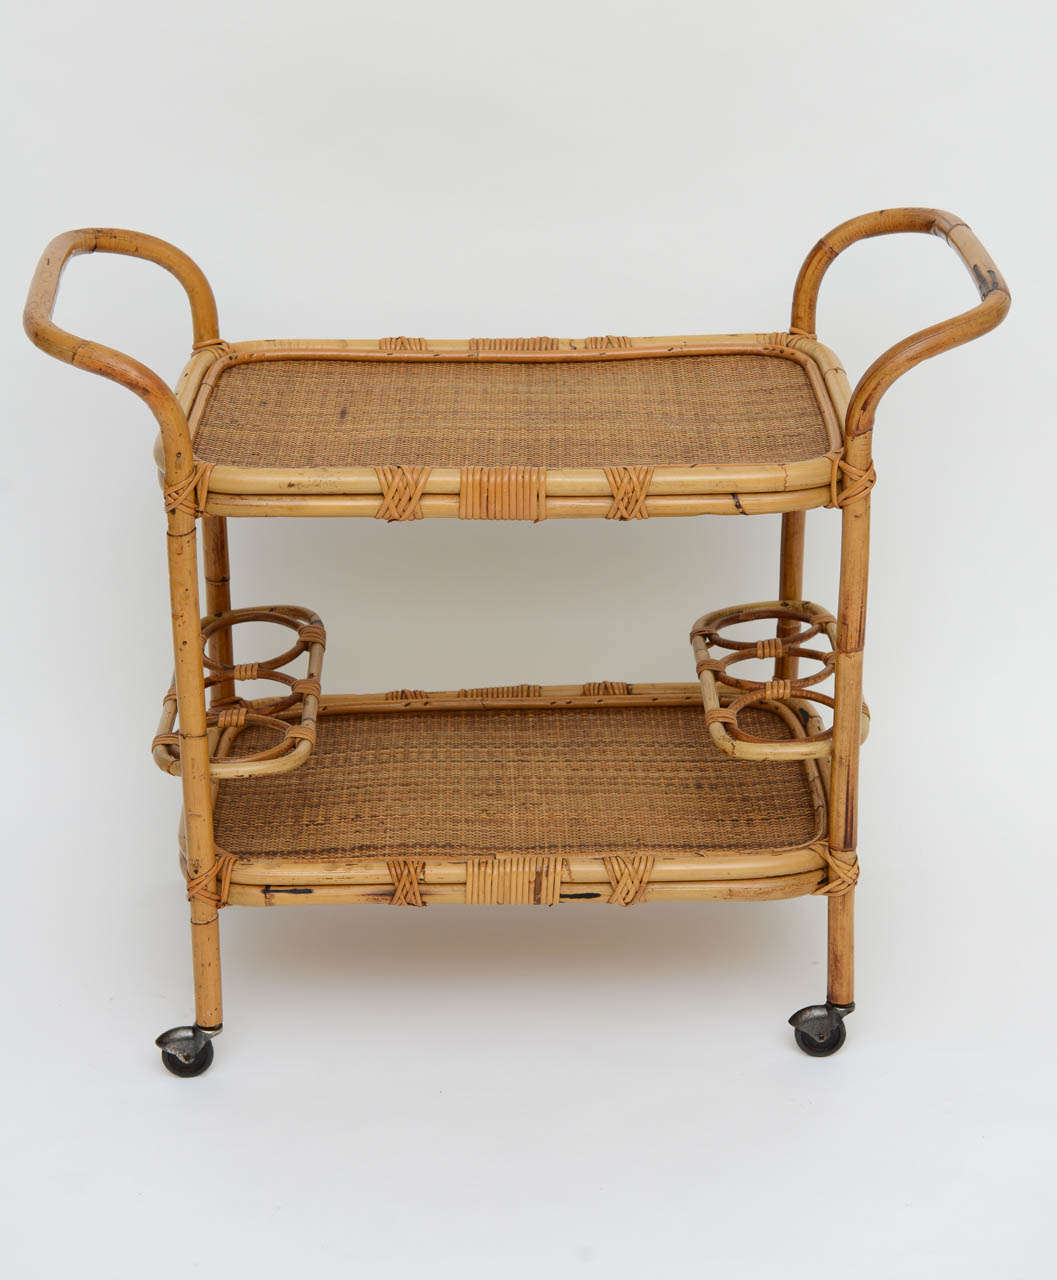 SOLD Smart and casual, reminding one of the islands or beach side abode, this rattan rolling cart features two levels of woven caneing and the lower of the two has holders for six bottles.  Great curved rattan handles, all on casters for easy